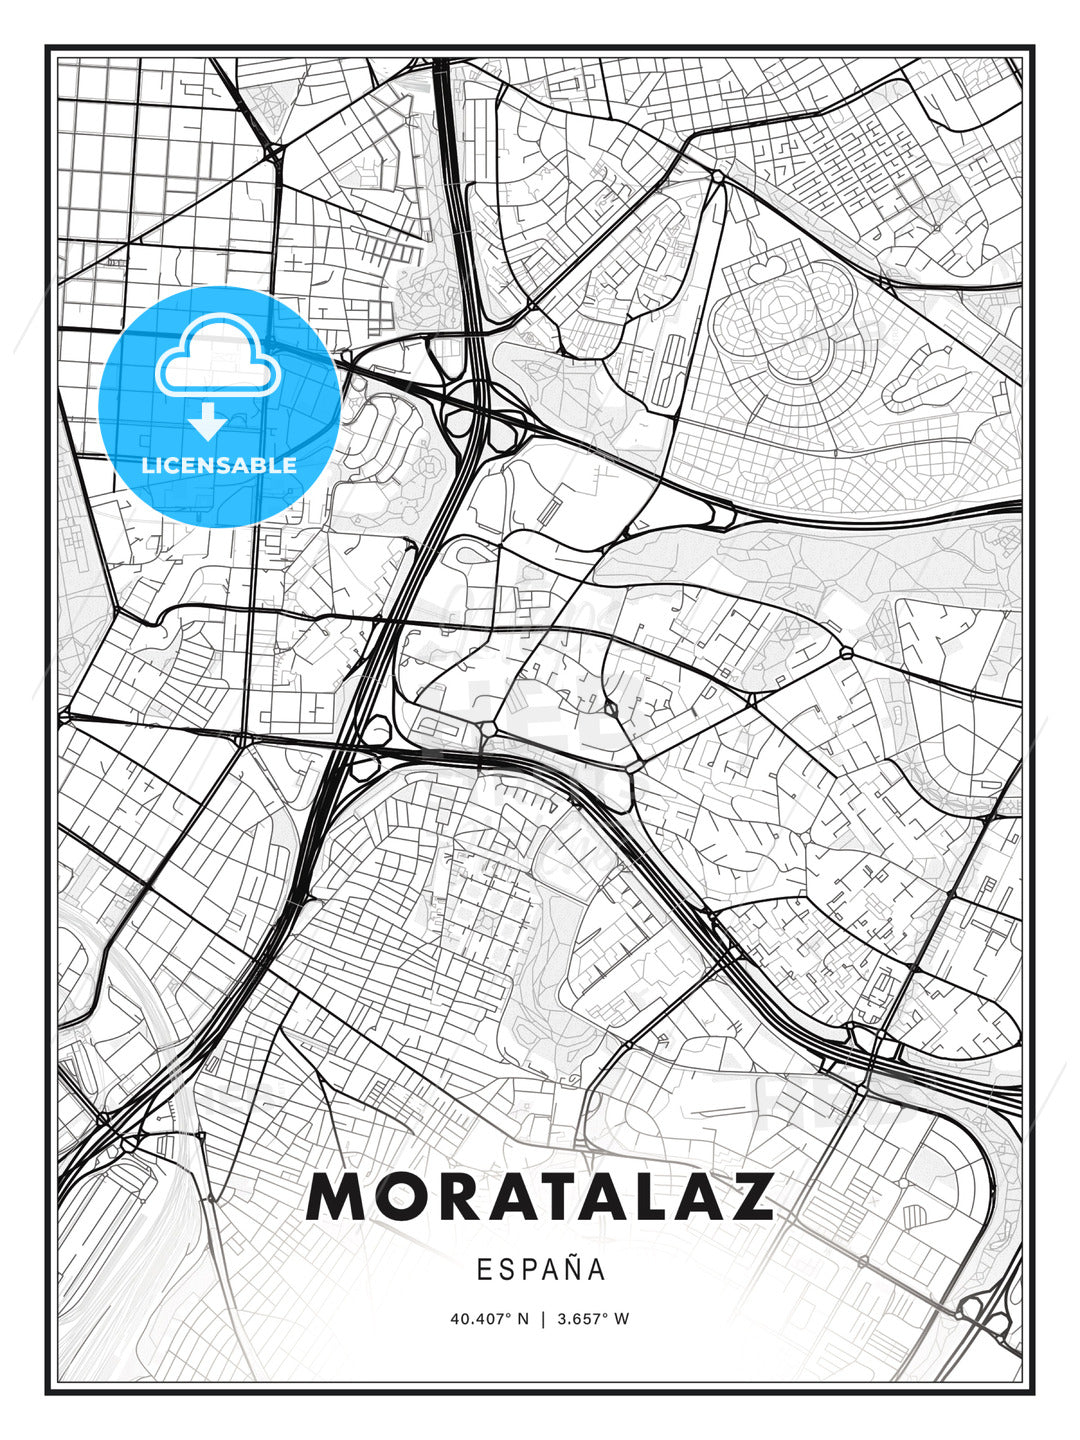 Moratalaz, Spain, Modern Print Template in Various Formats - HEBSTREITS Sketches